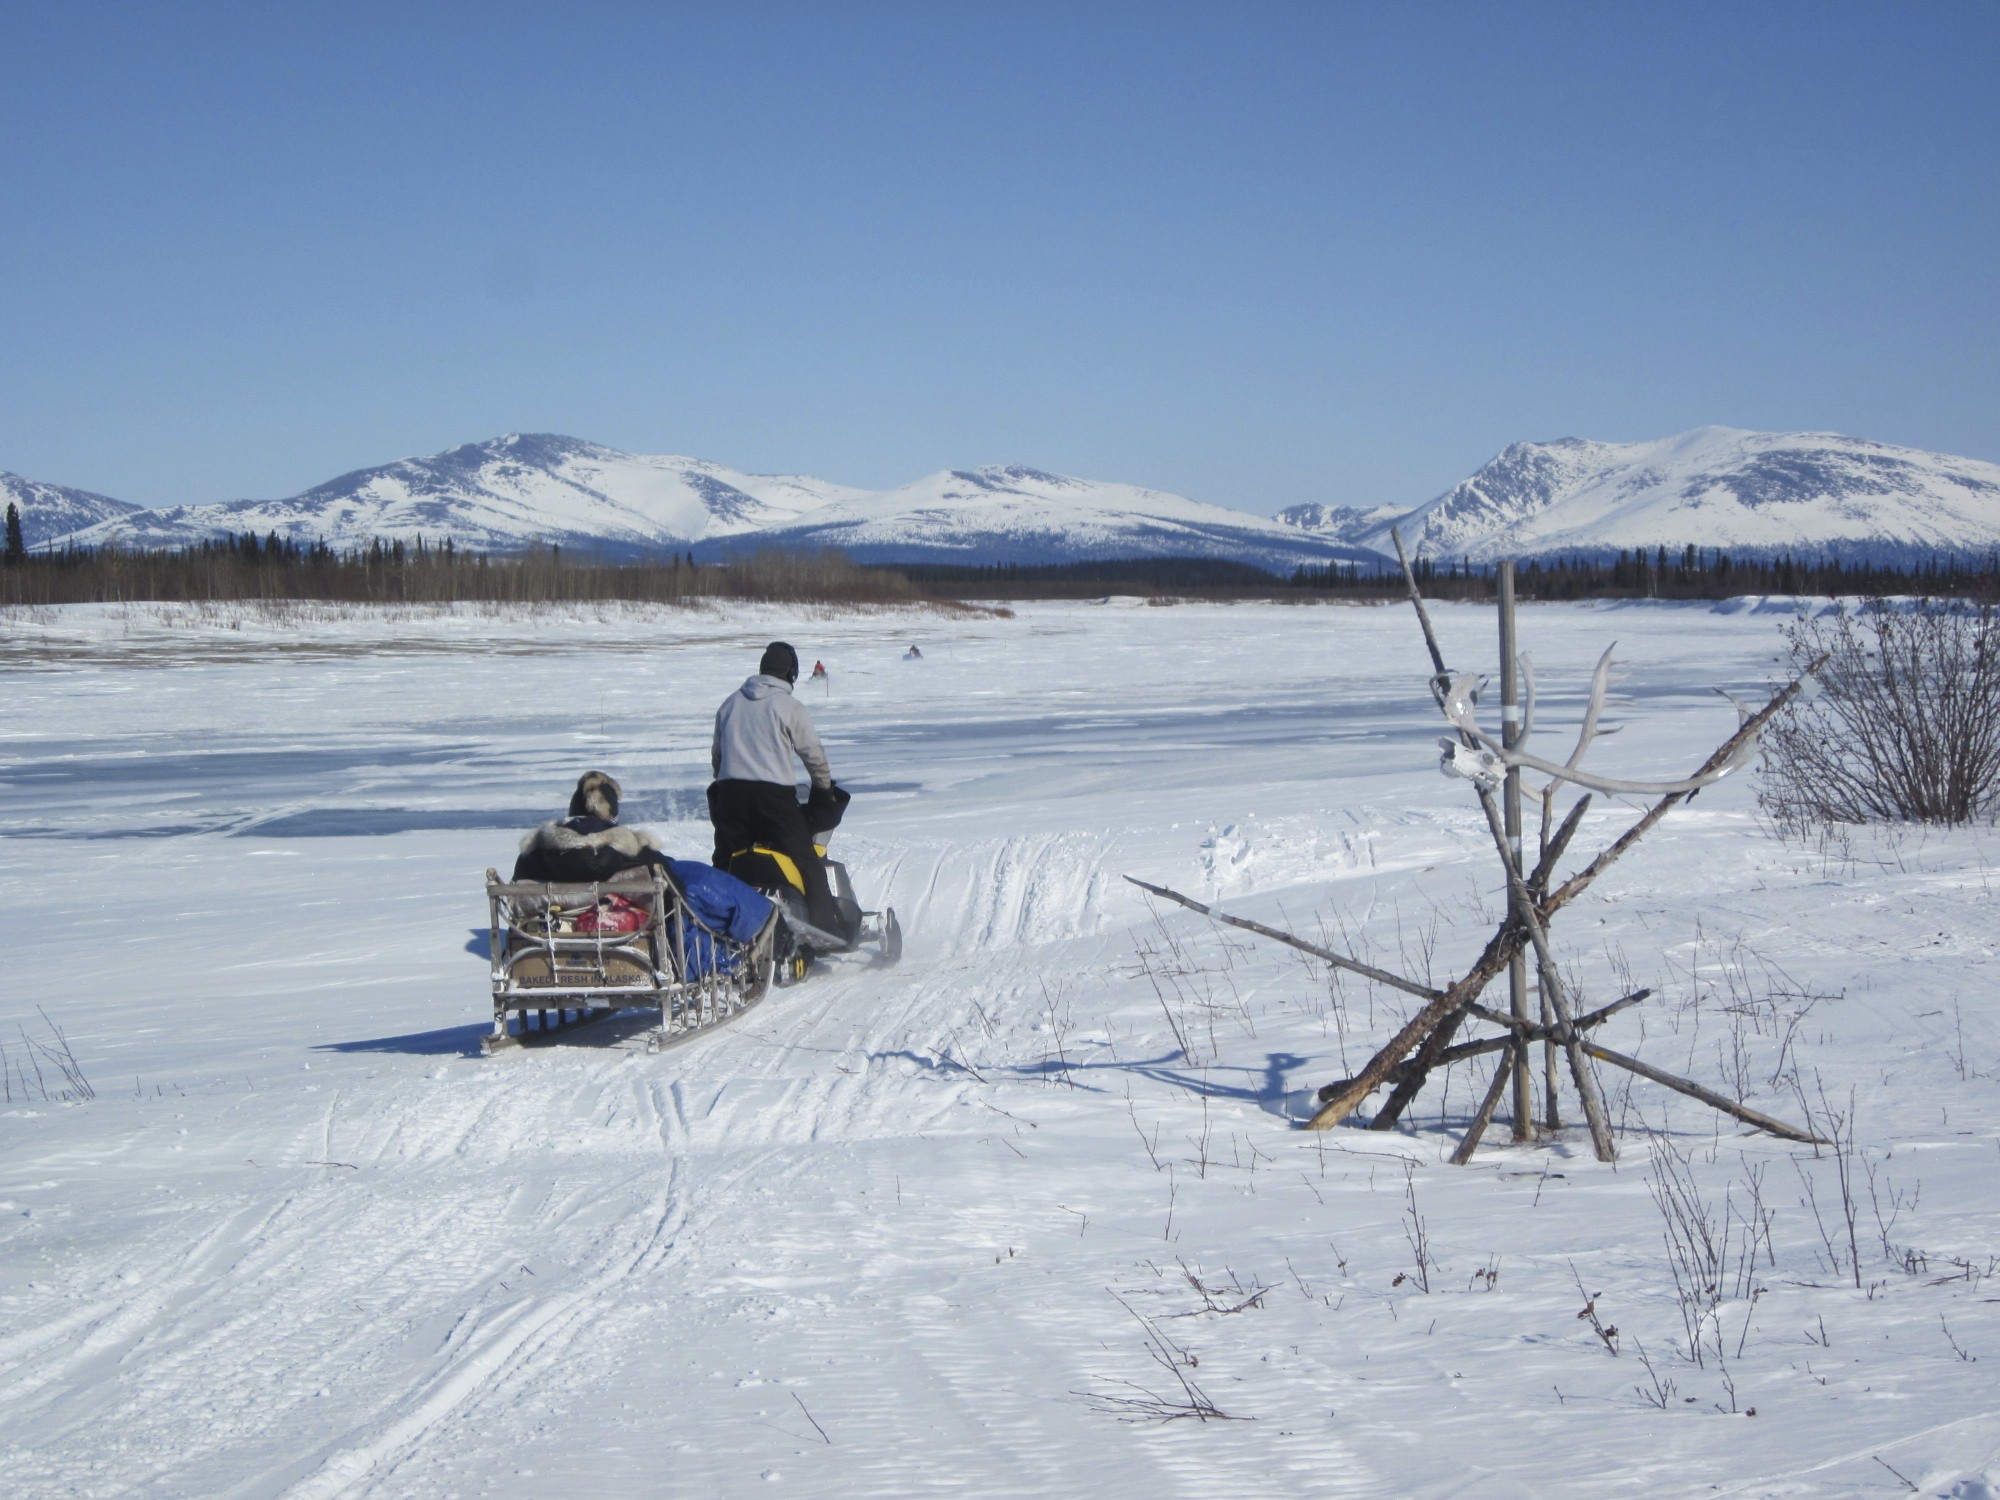 A person drives a snowmobile over past a wooden trail stake, towing a wooden sled with a passenger sitting inside